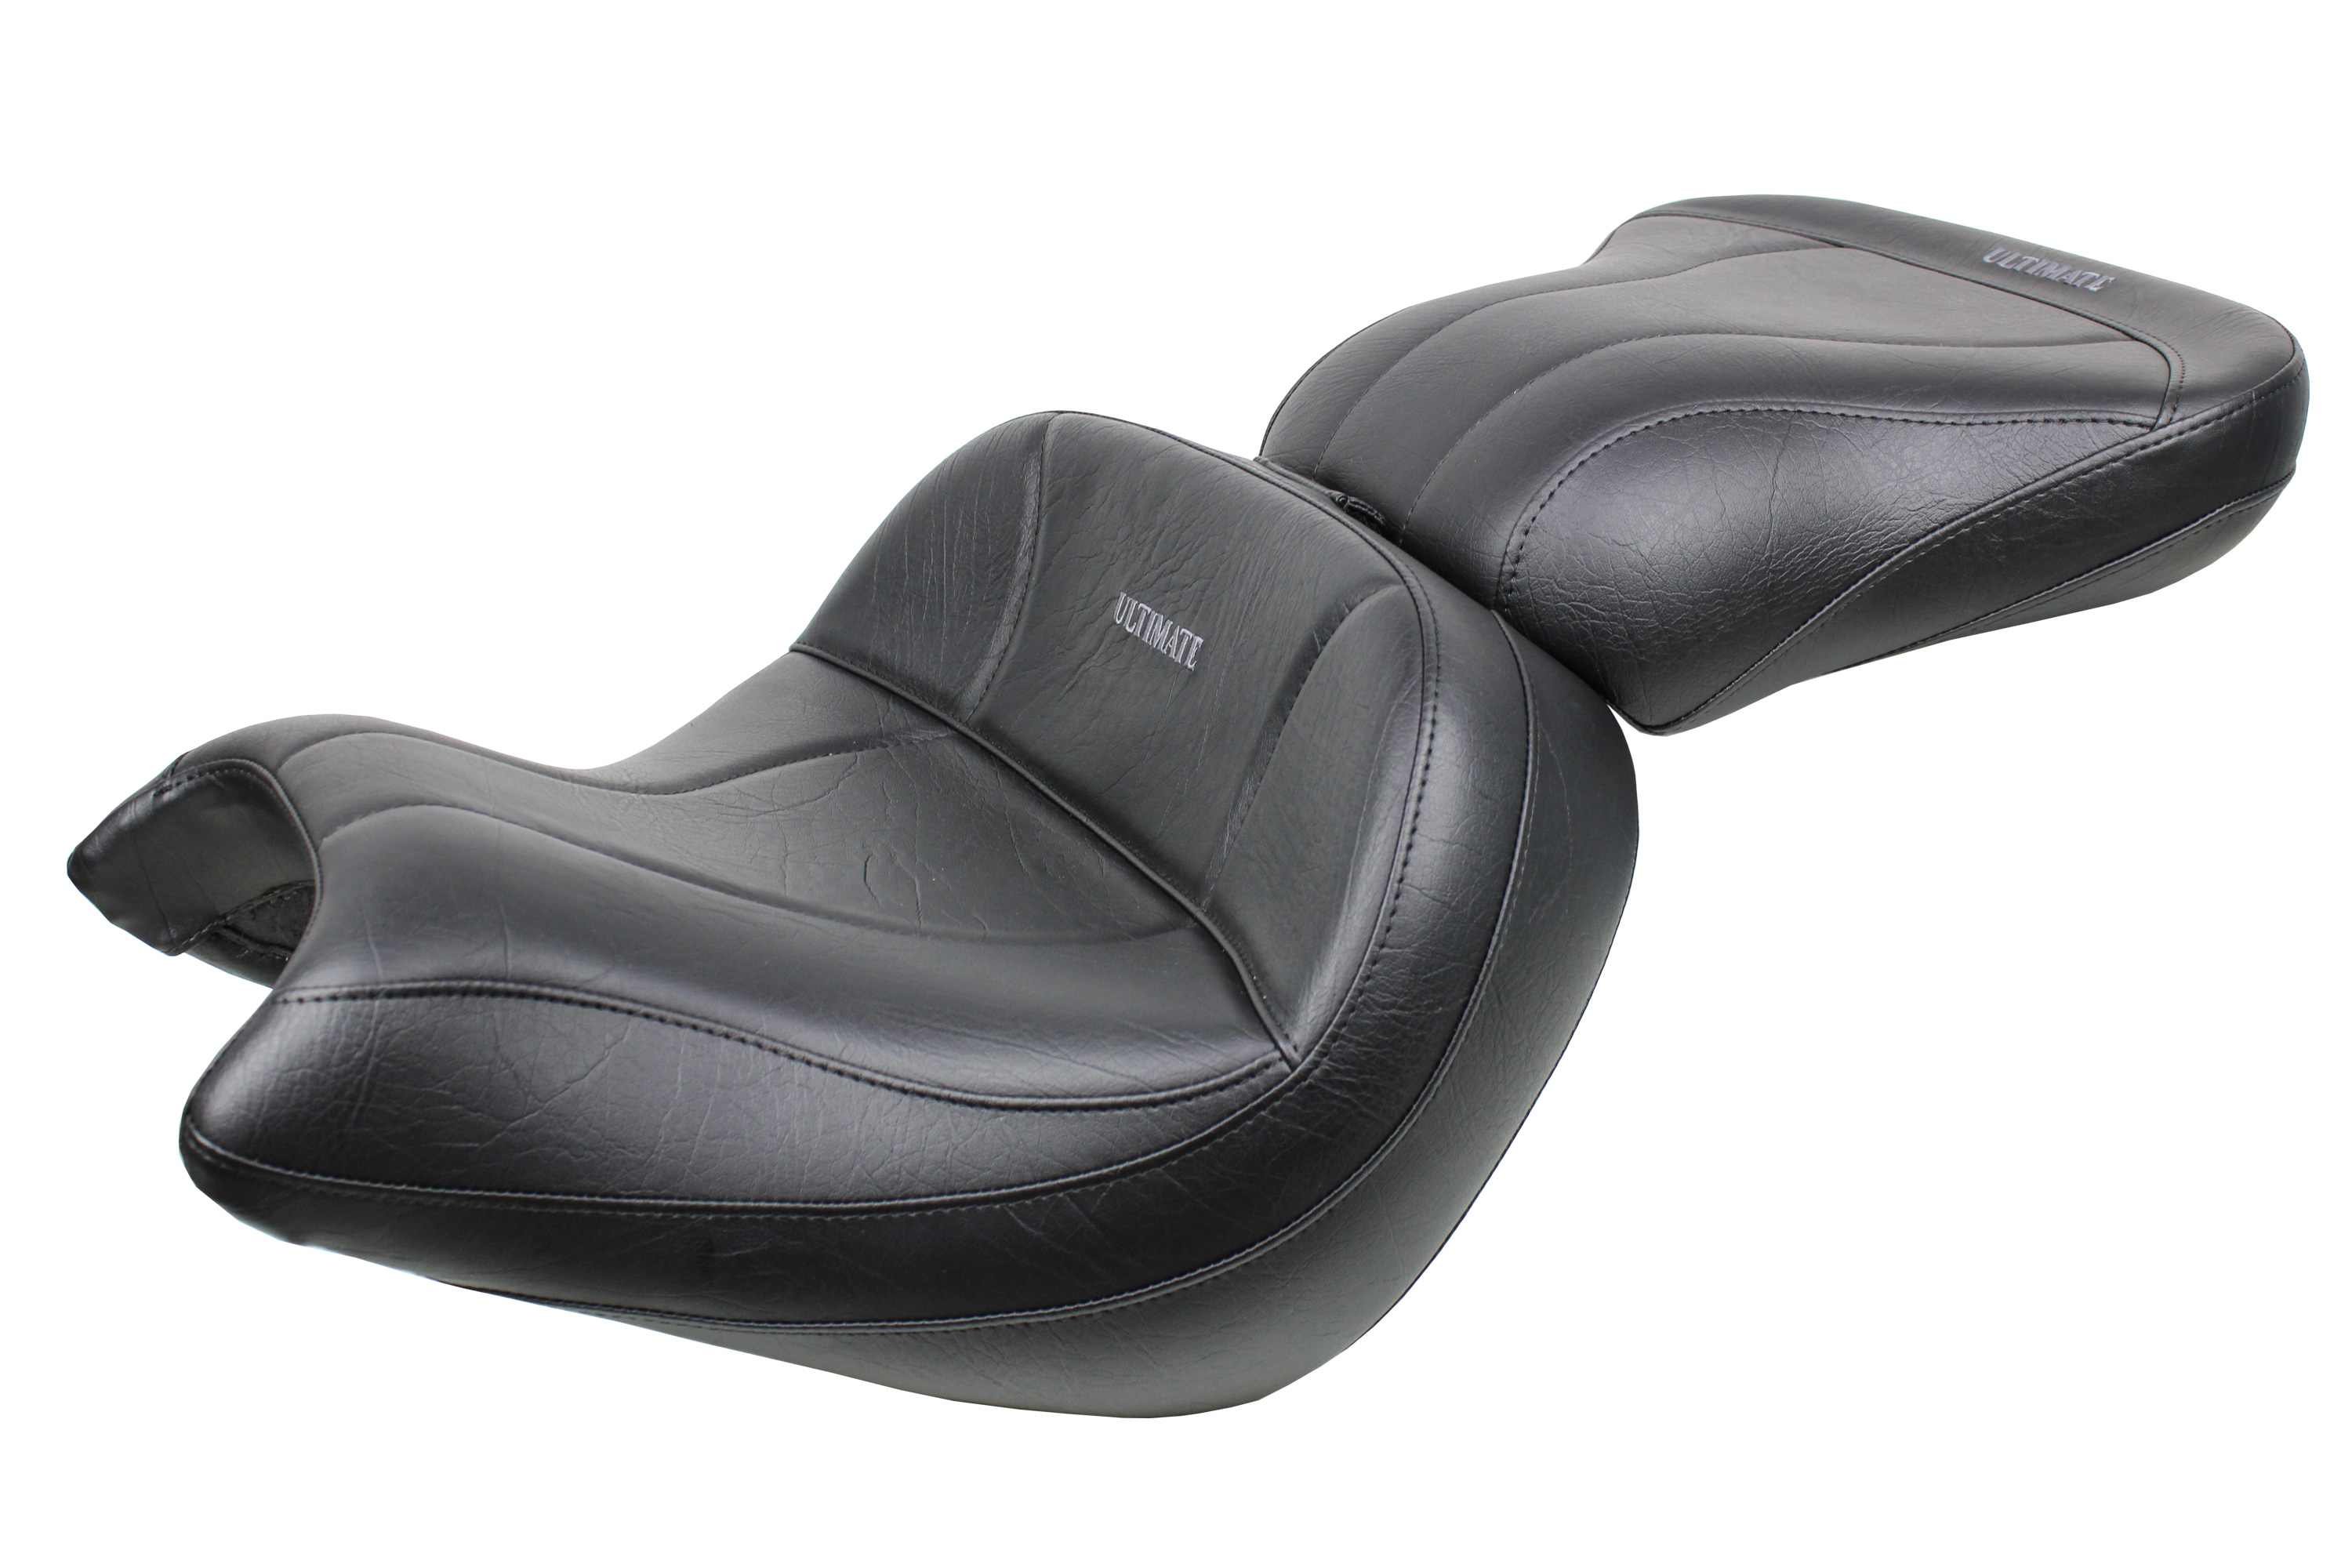 VTX 1800 C Lowrider Seat and Passenger Seat - Plain or Studded